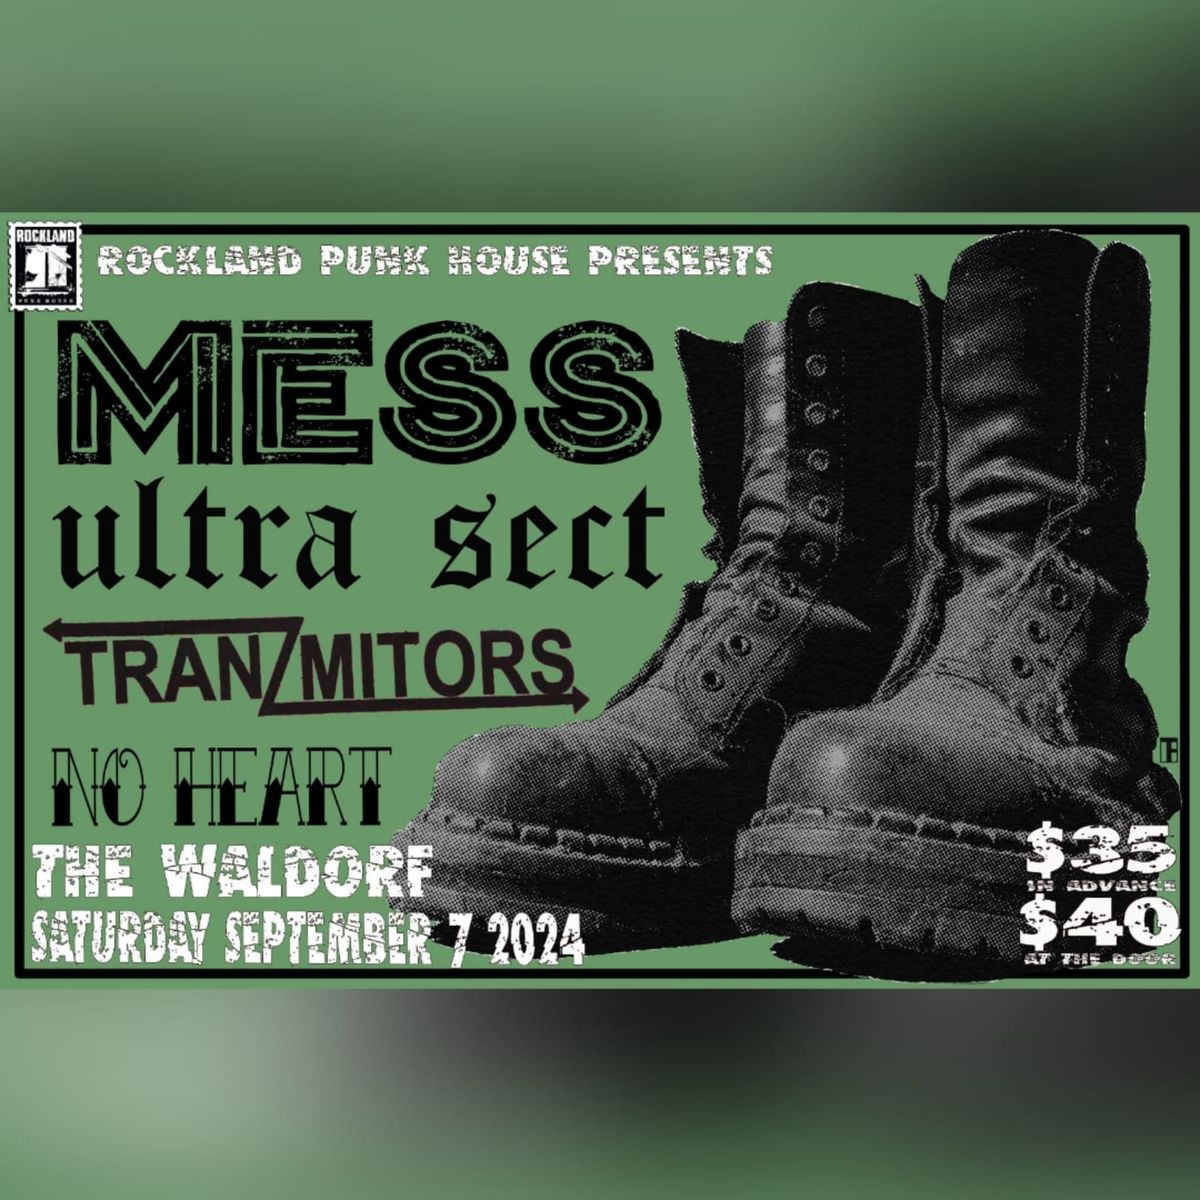 Rockland Punk House Presents MESS, Ultra Sect, Tranzmitors and No Heart